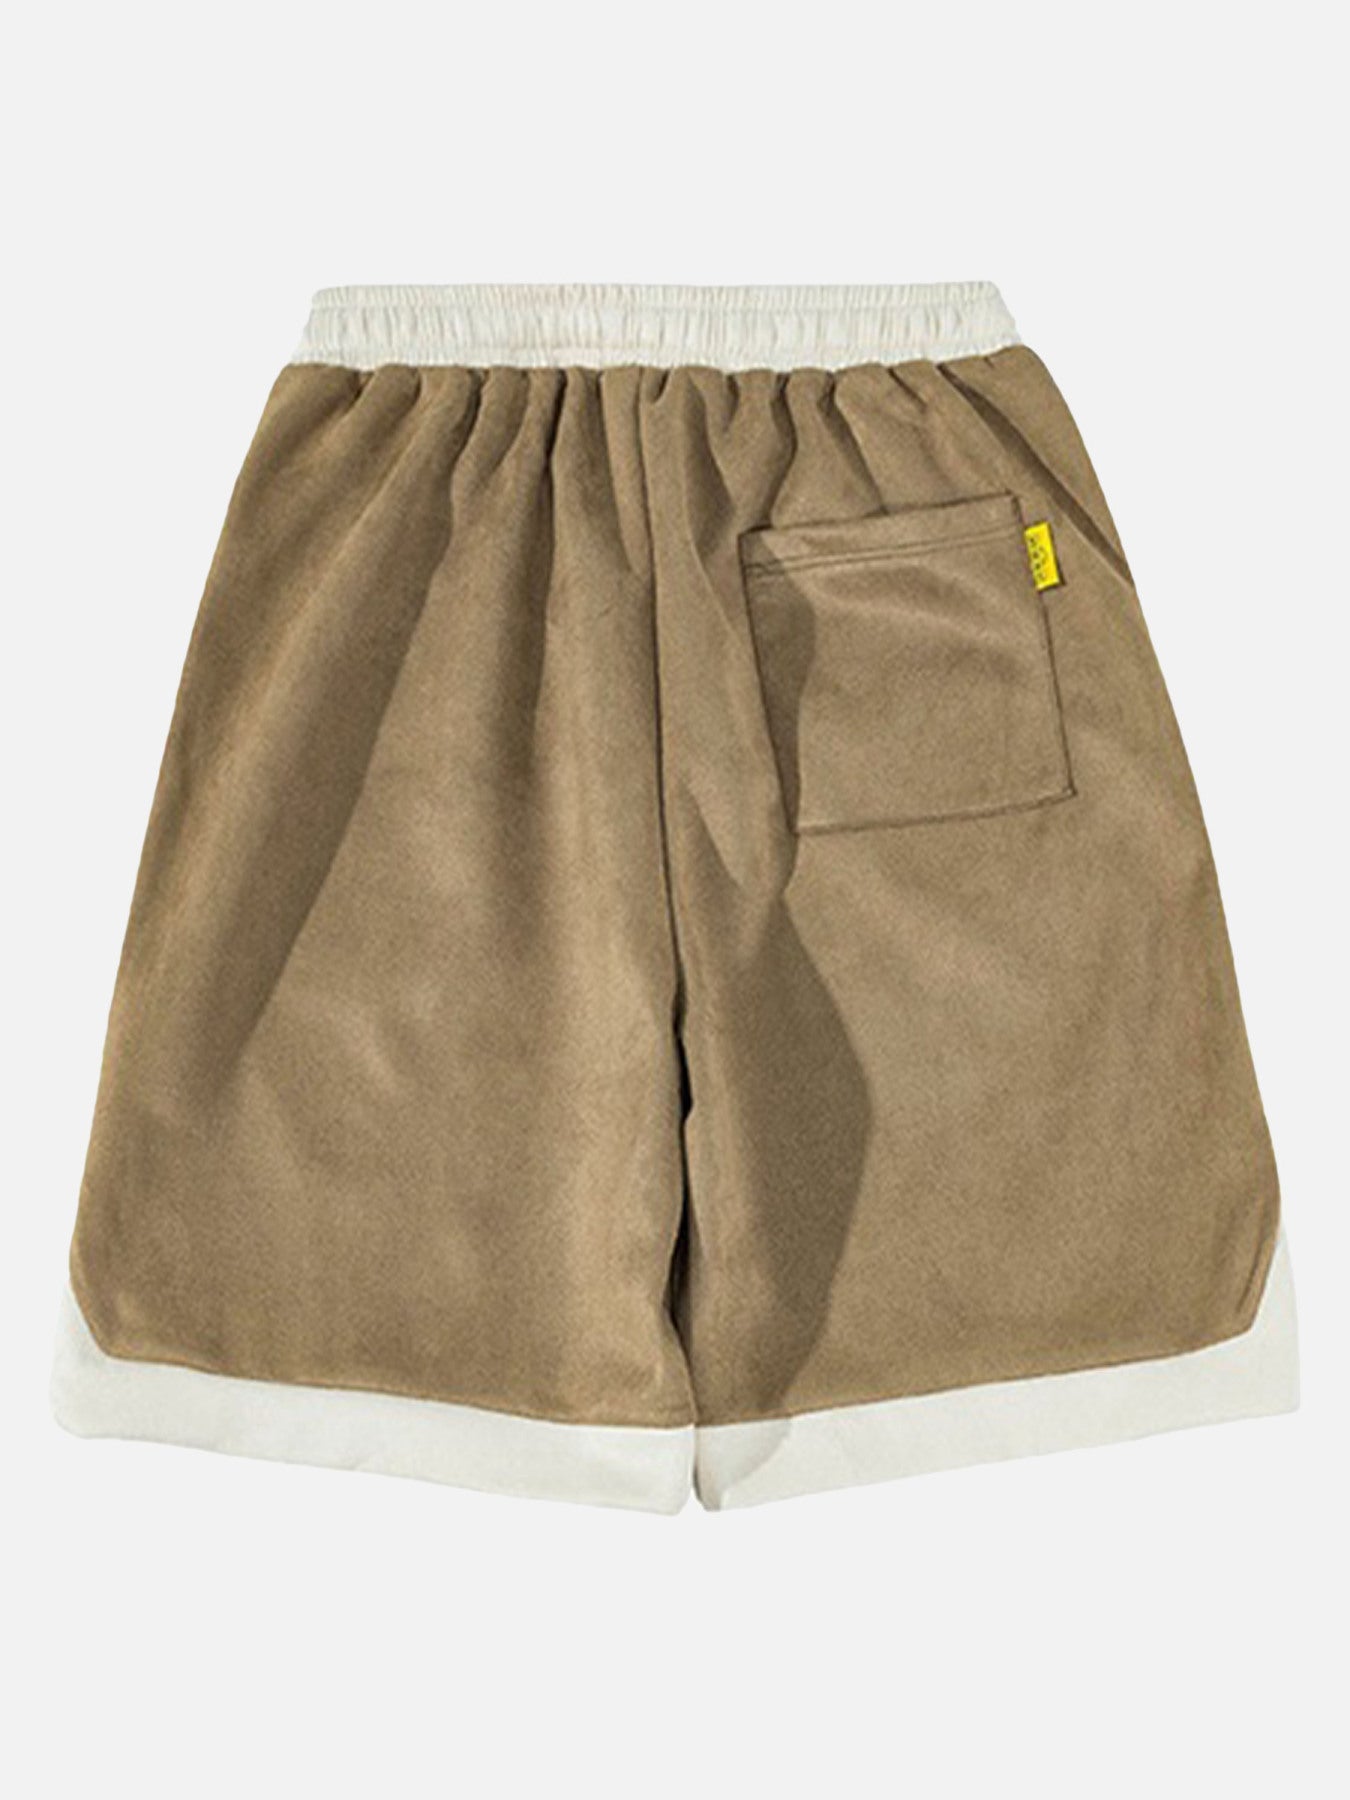 Sneakerland Suede Loose Fitting Shorts SP230524KFB3